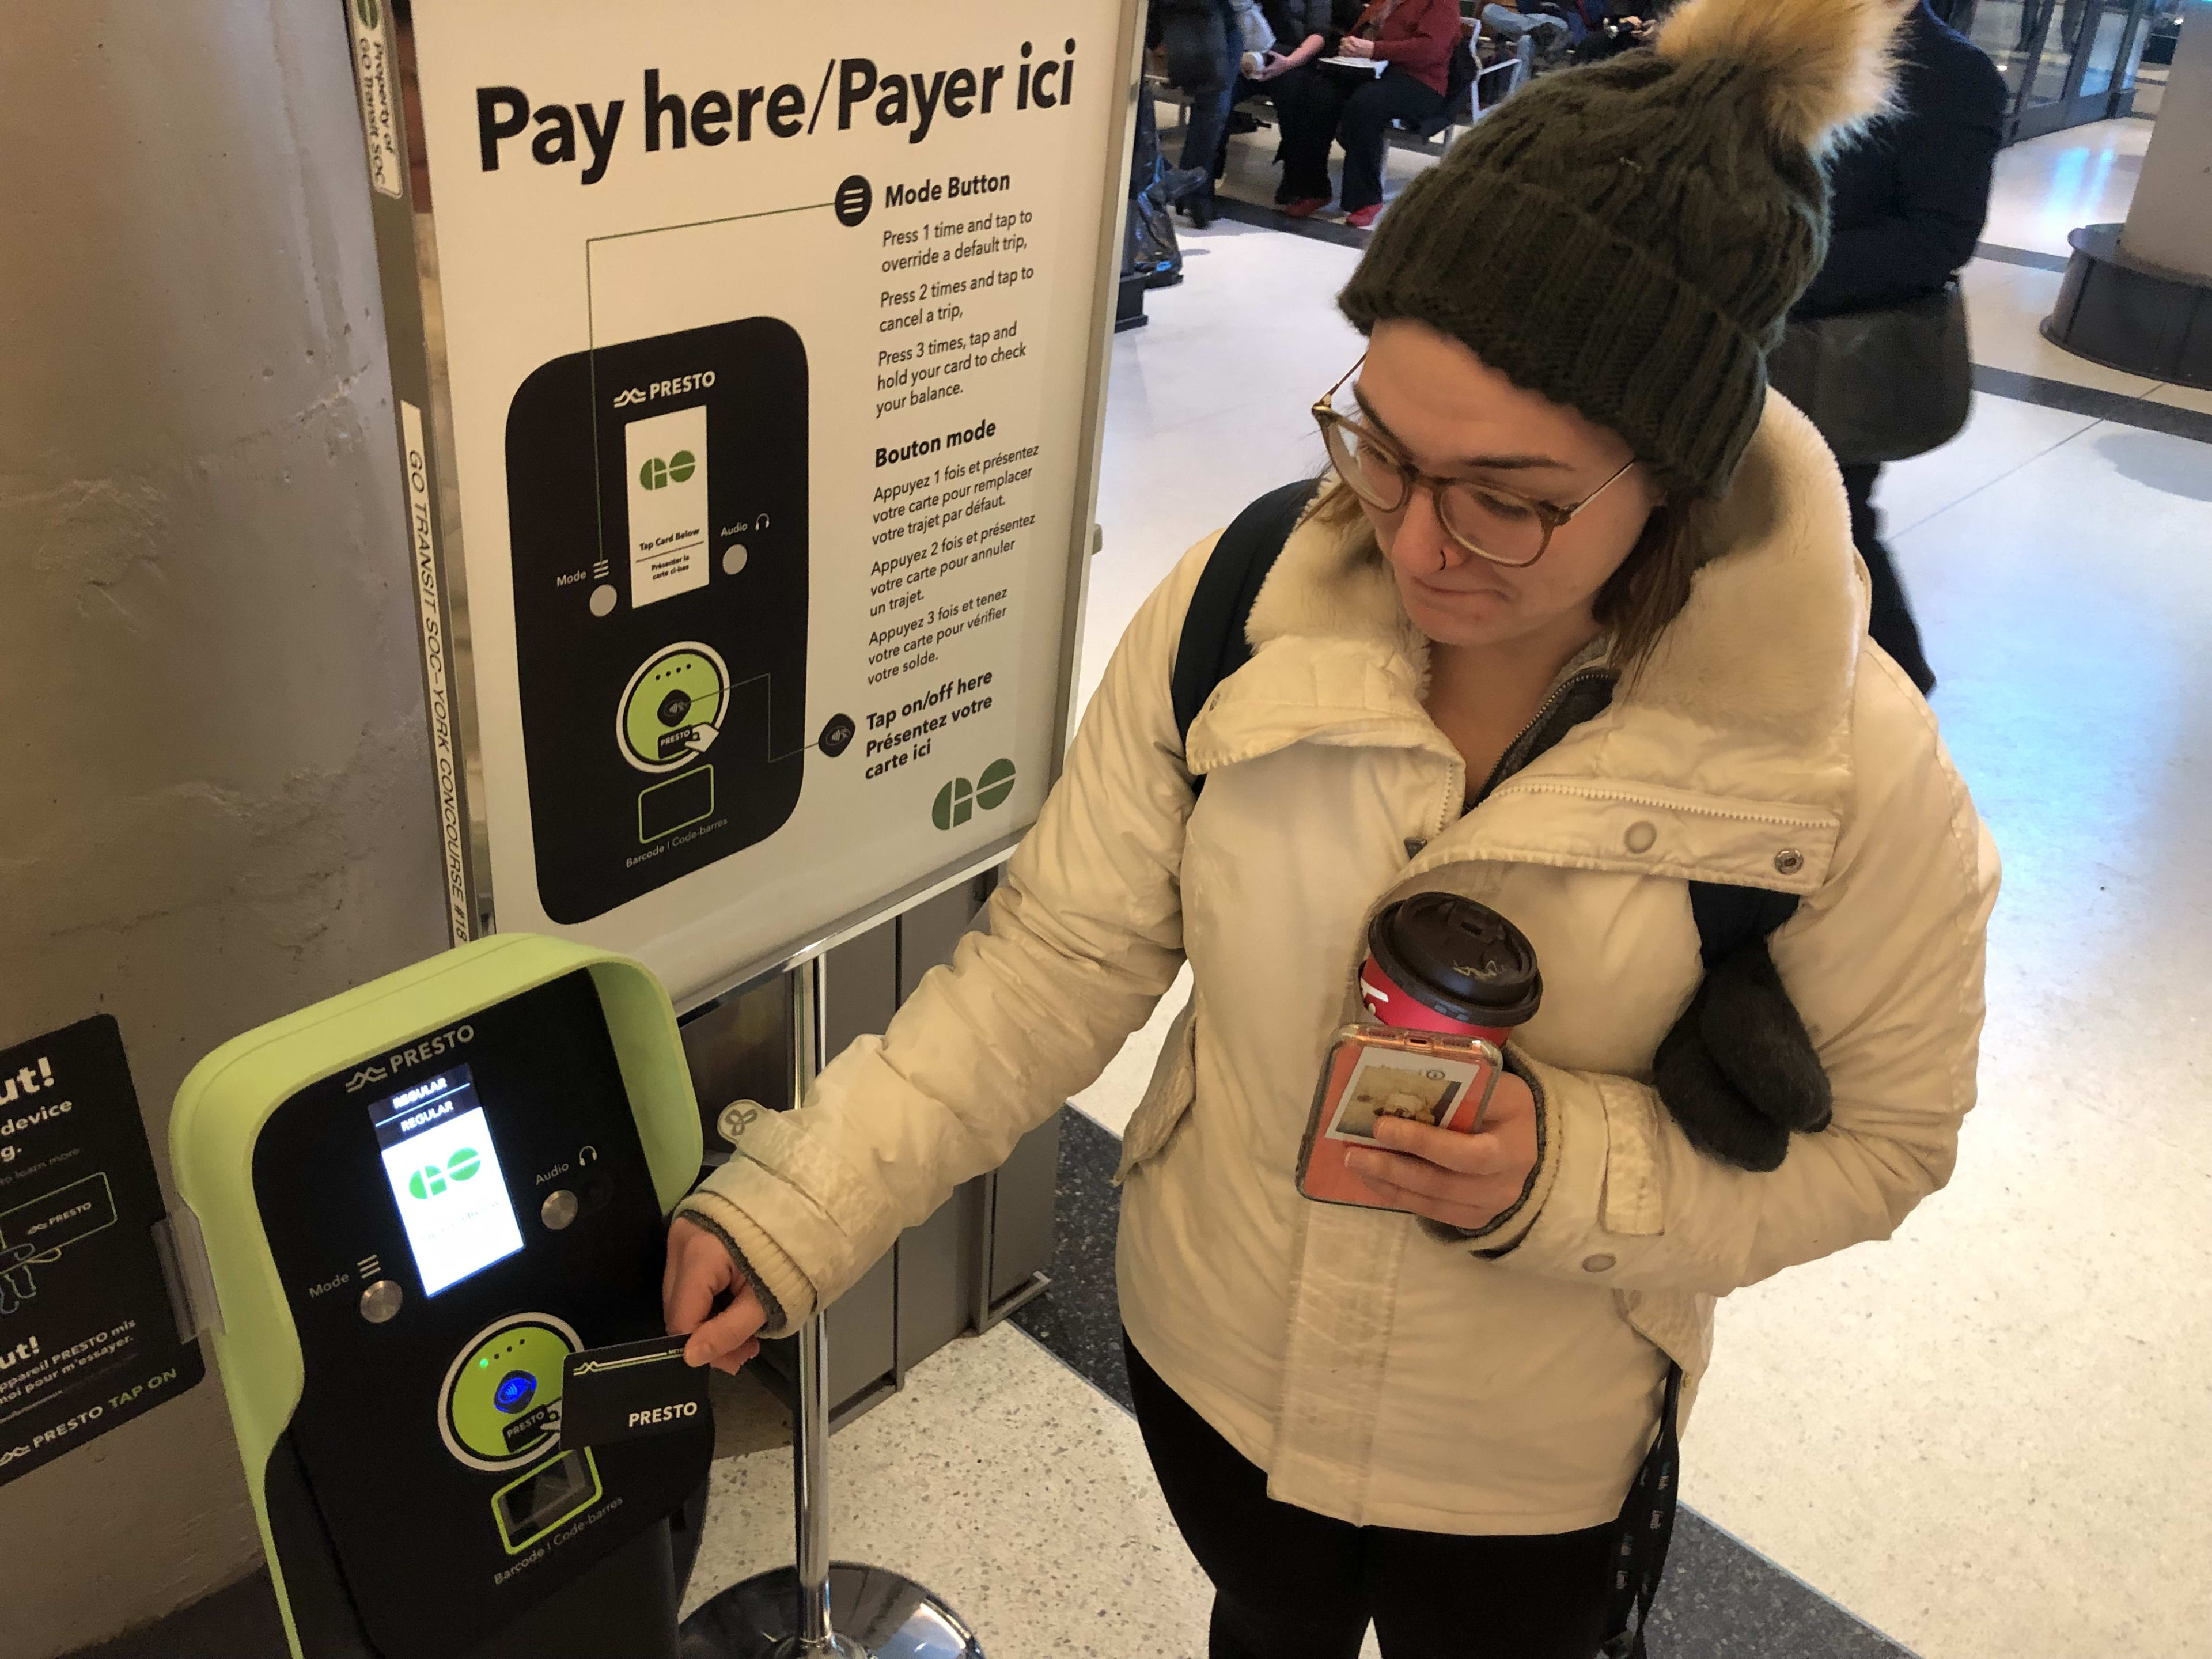 Erica tapping her PRESTO card.